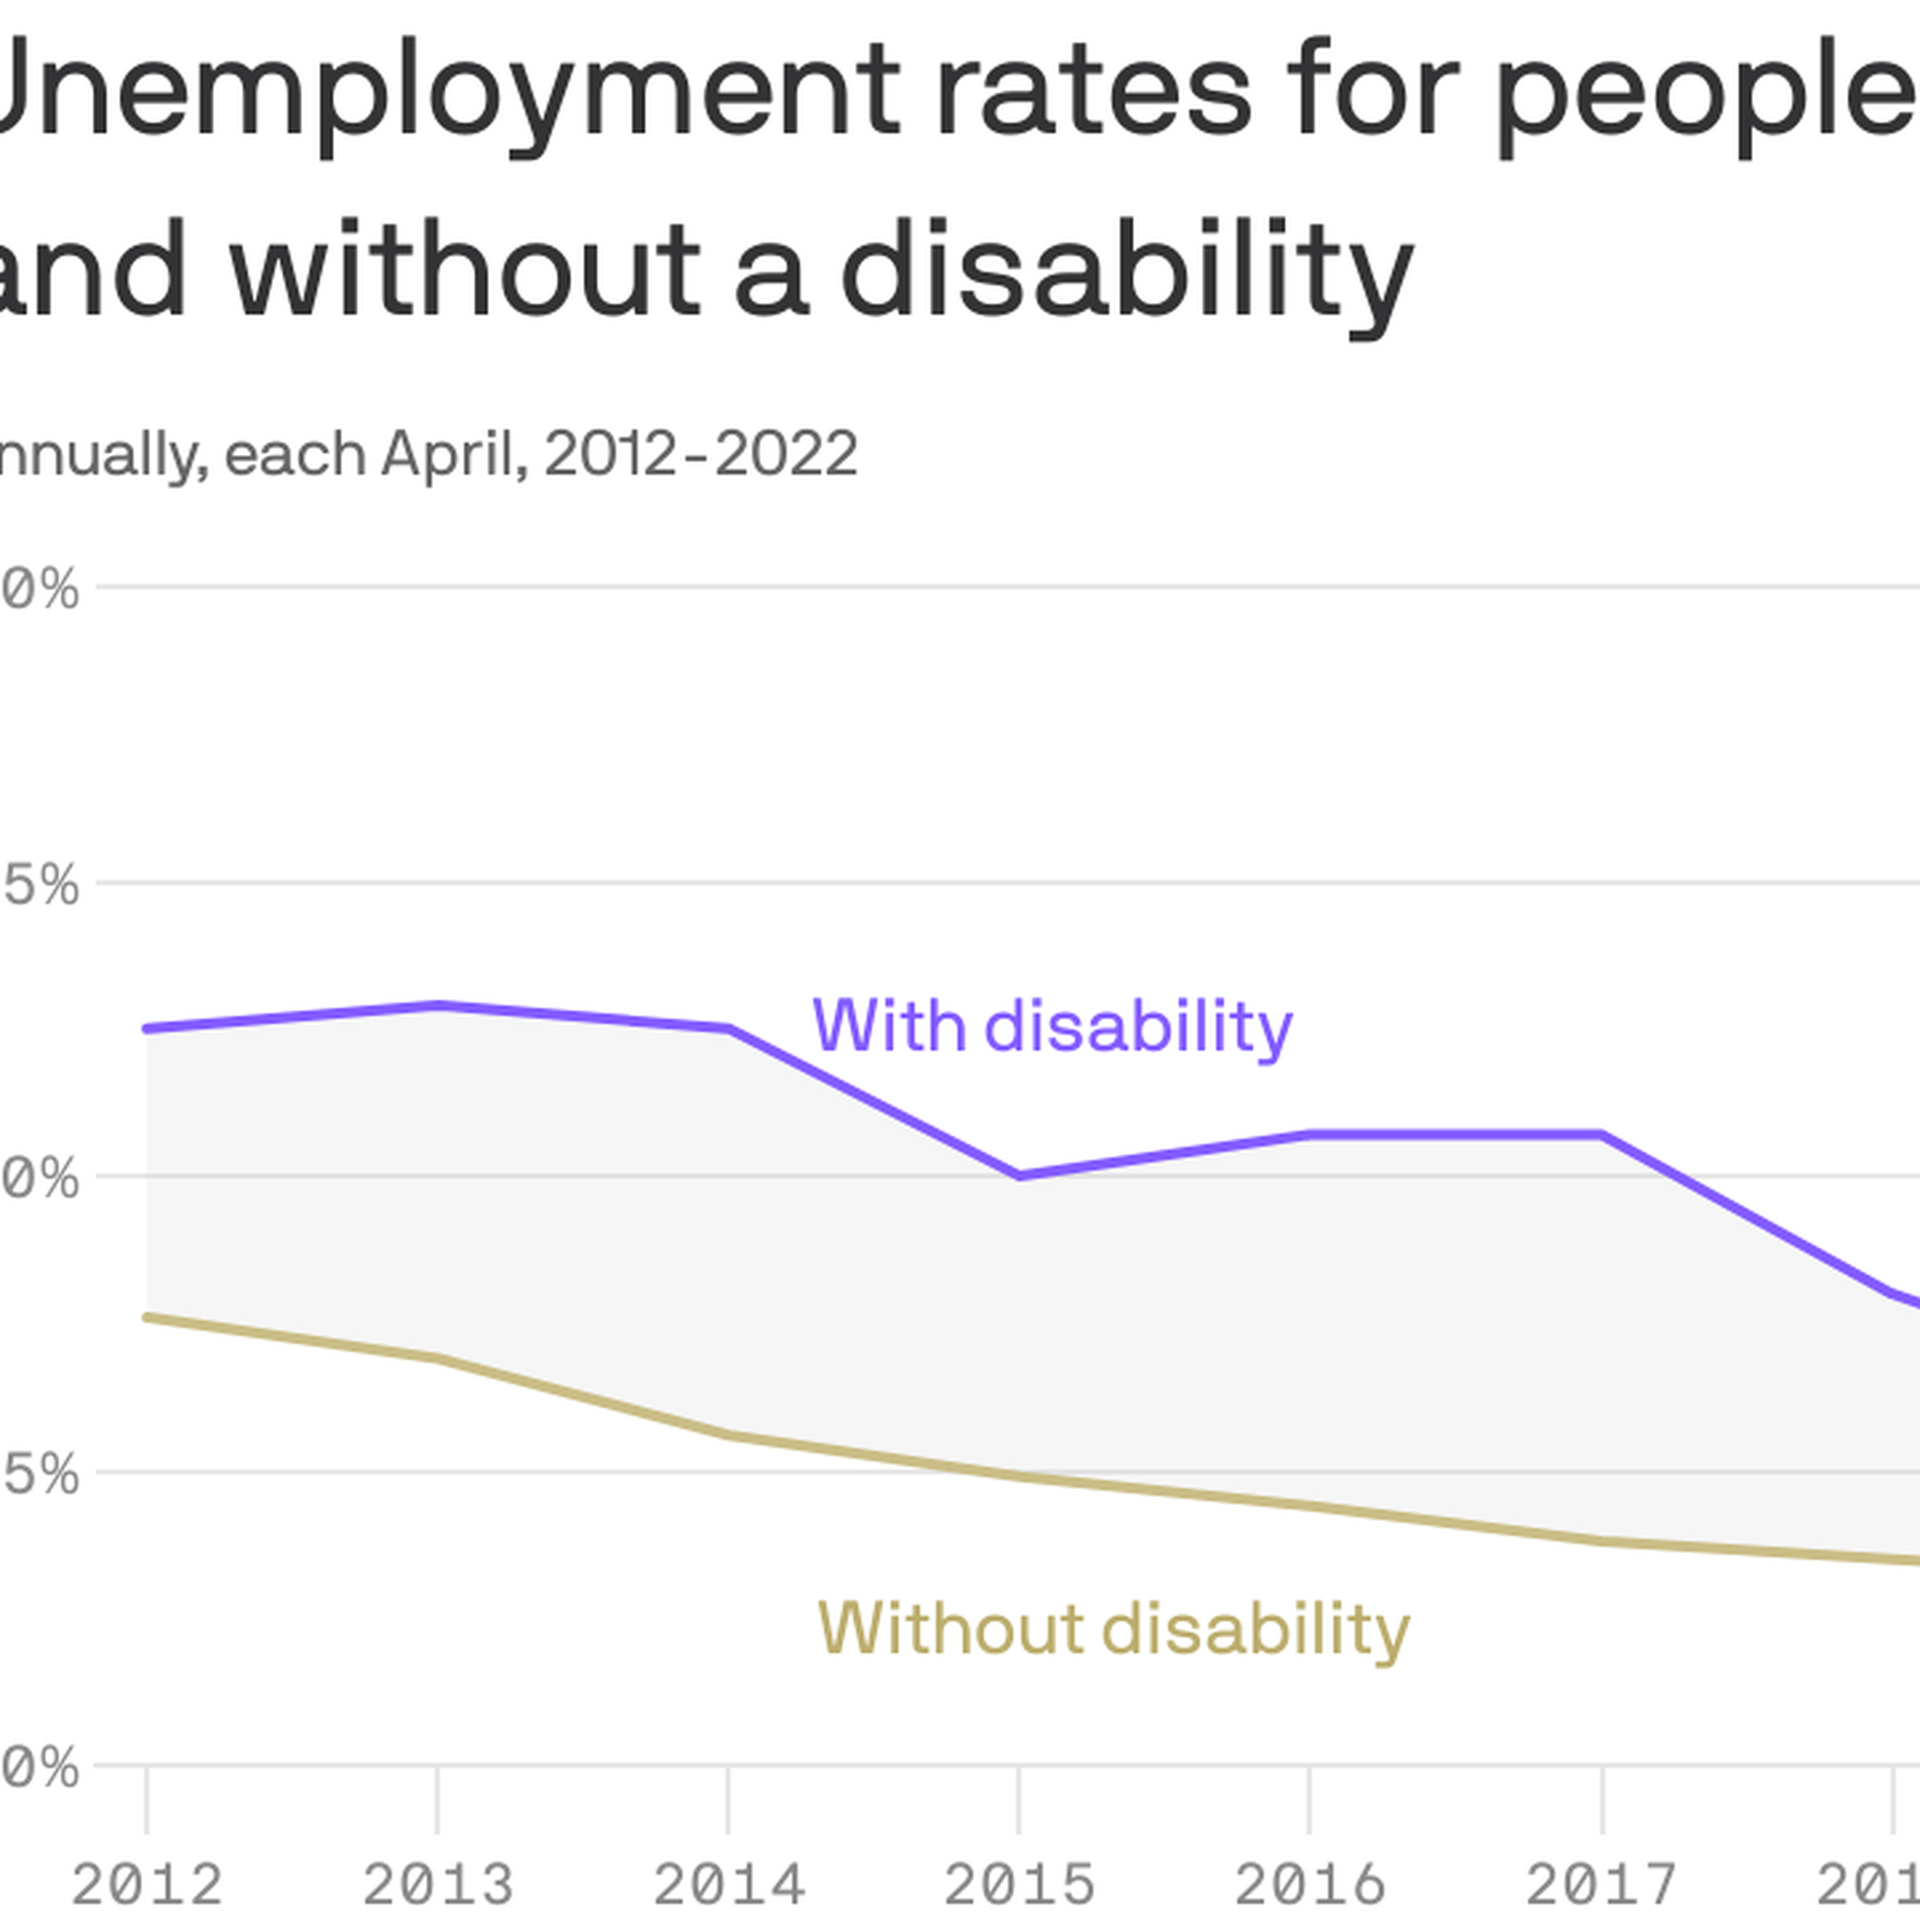 Unemployment rates for people with and without a disability